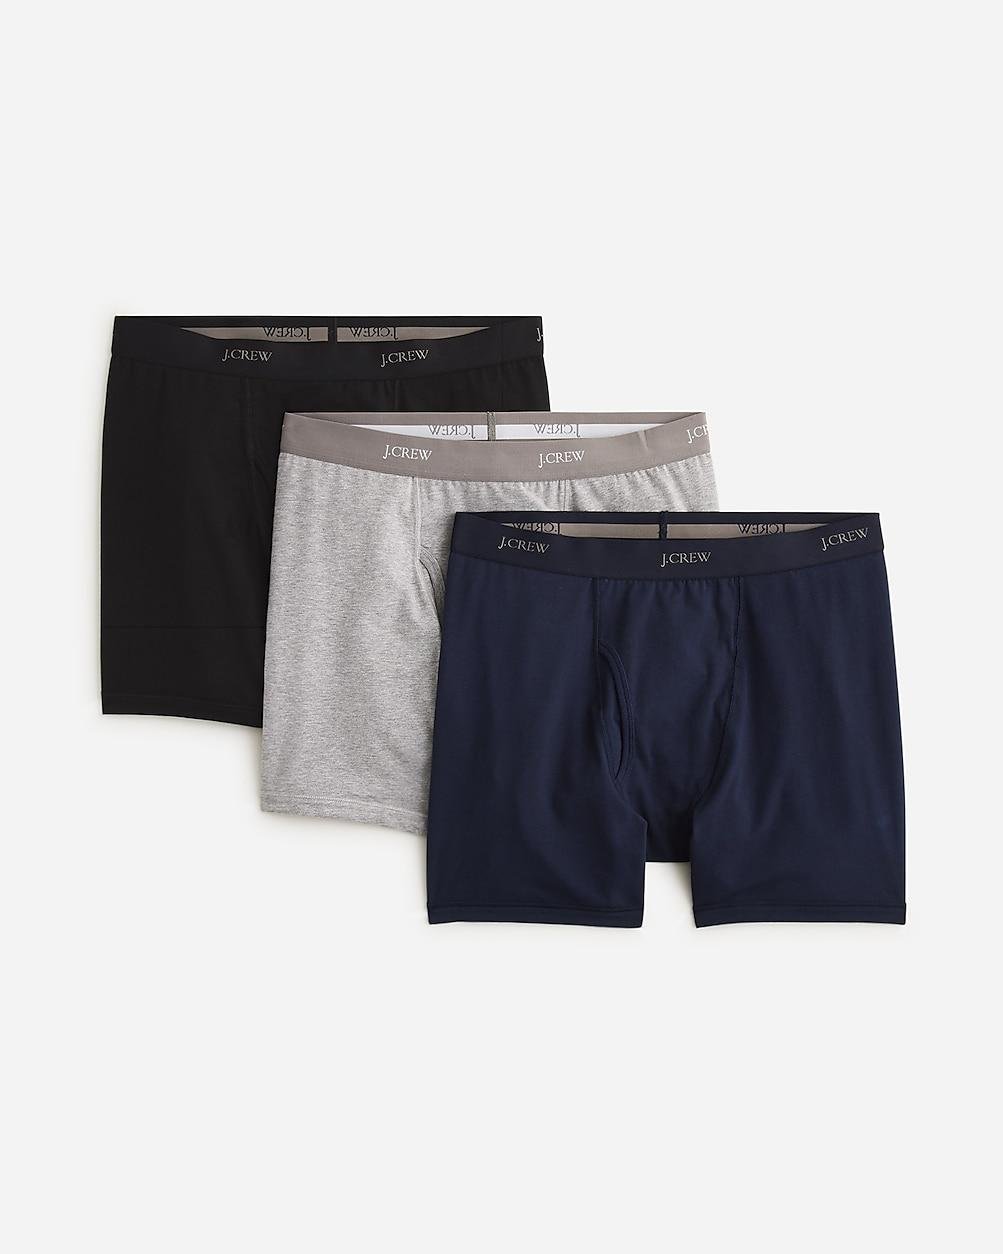 Stretch 4'' boxer briefs three-pack by J.CREW